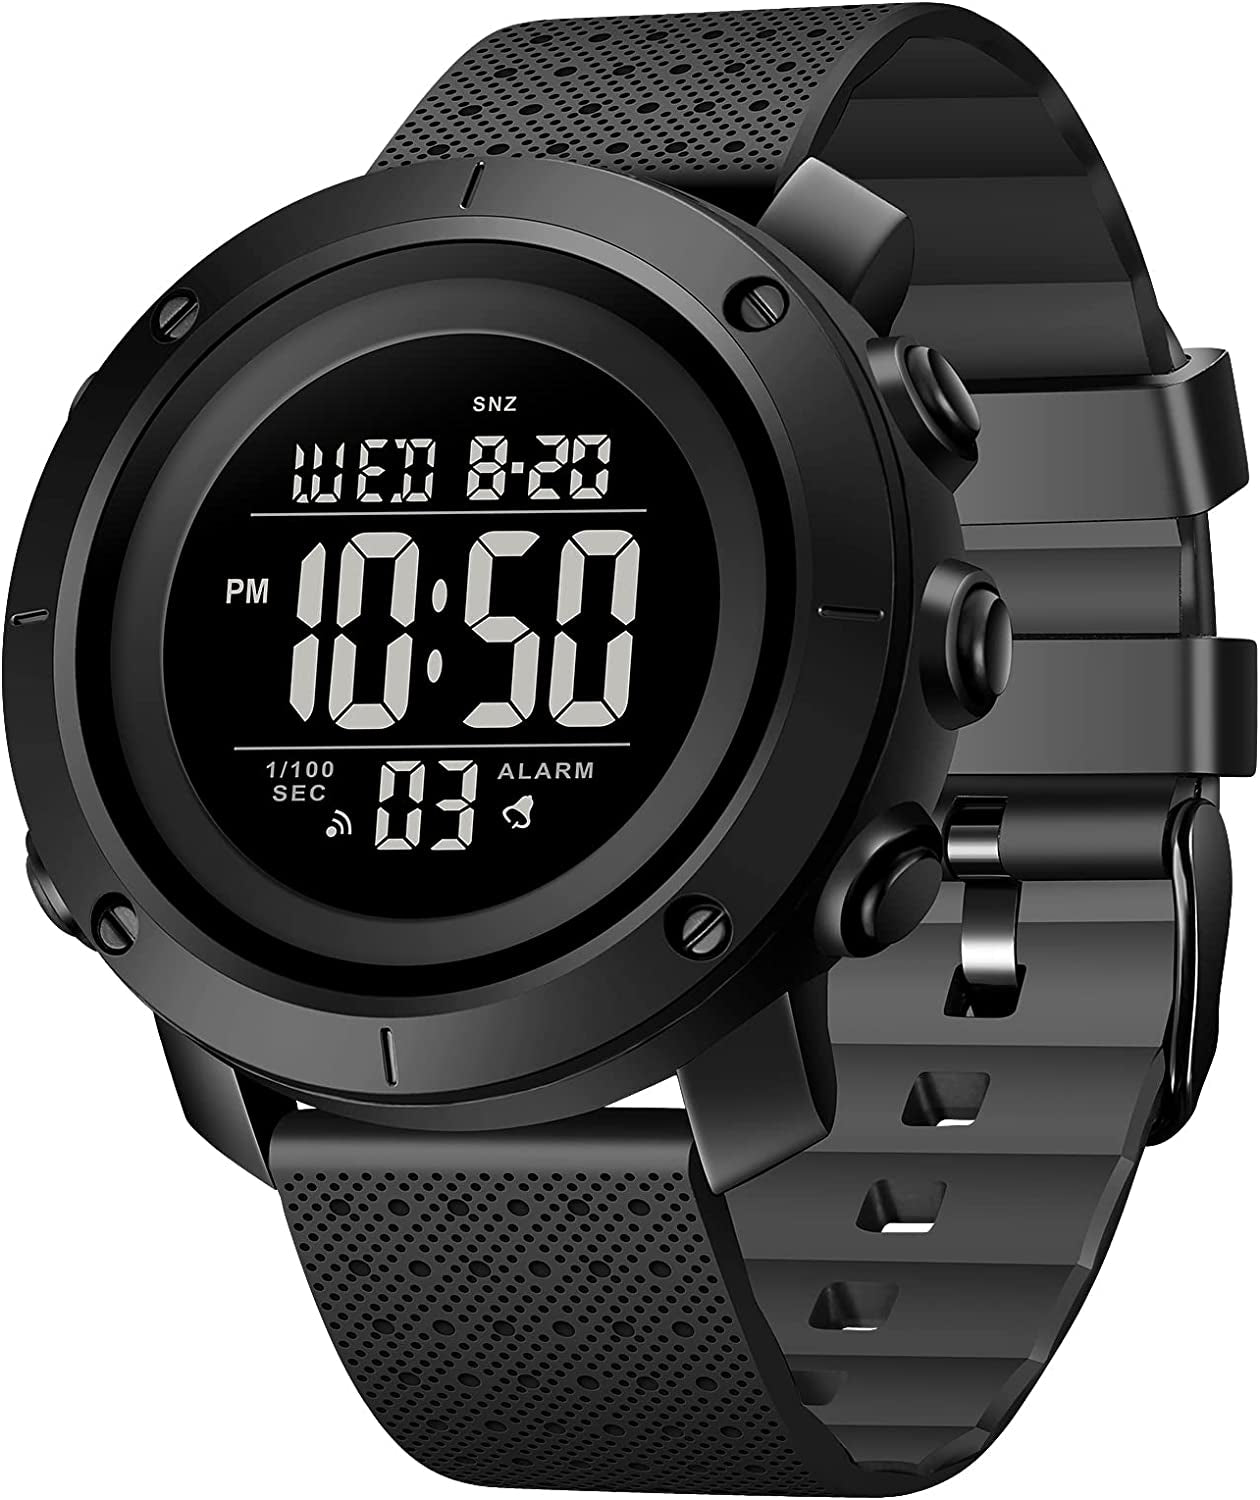 Men's Digital Sports Military Watch Large Face Simple Wrist Watches Fashion LED Digital Display Silicone Band Watches with Stopwatch Alarm